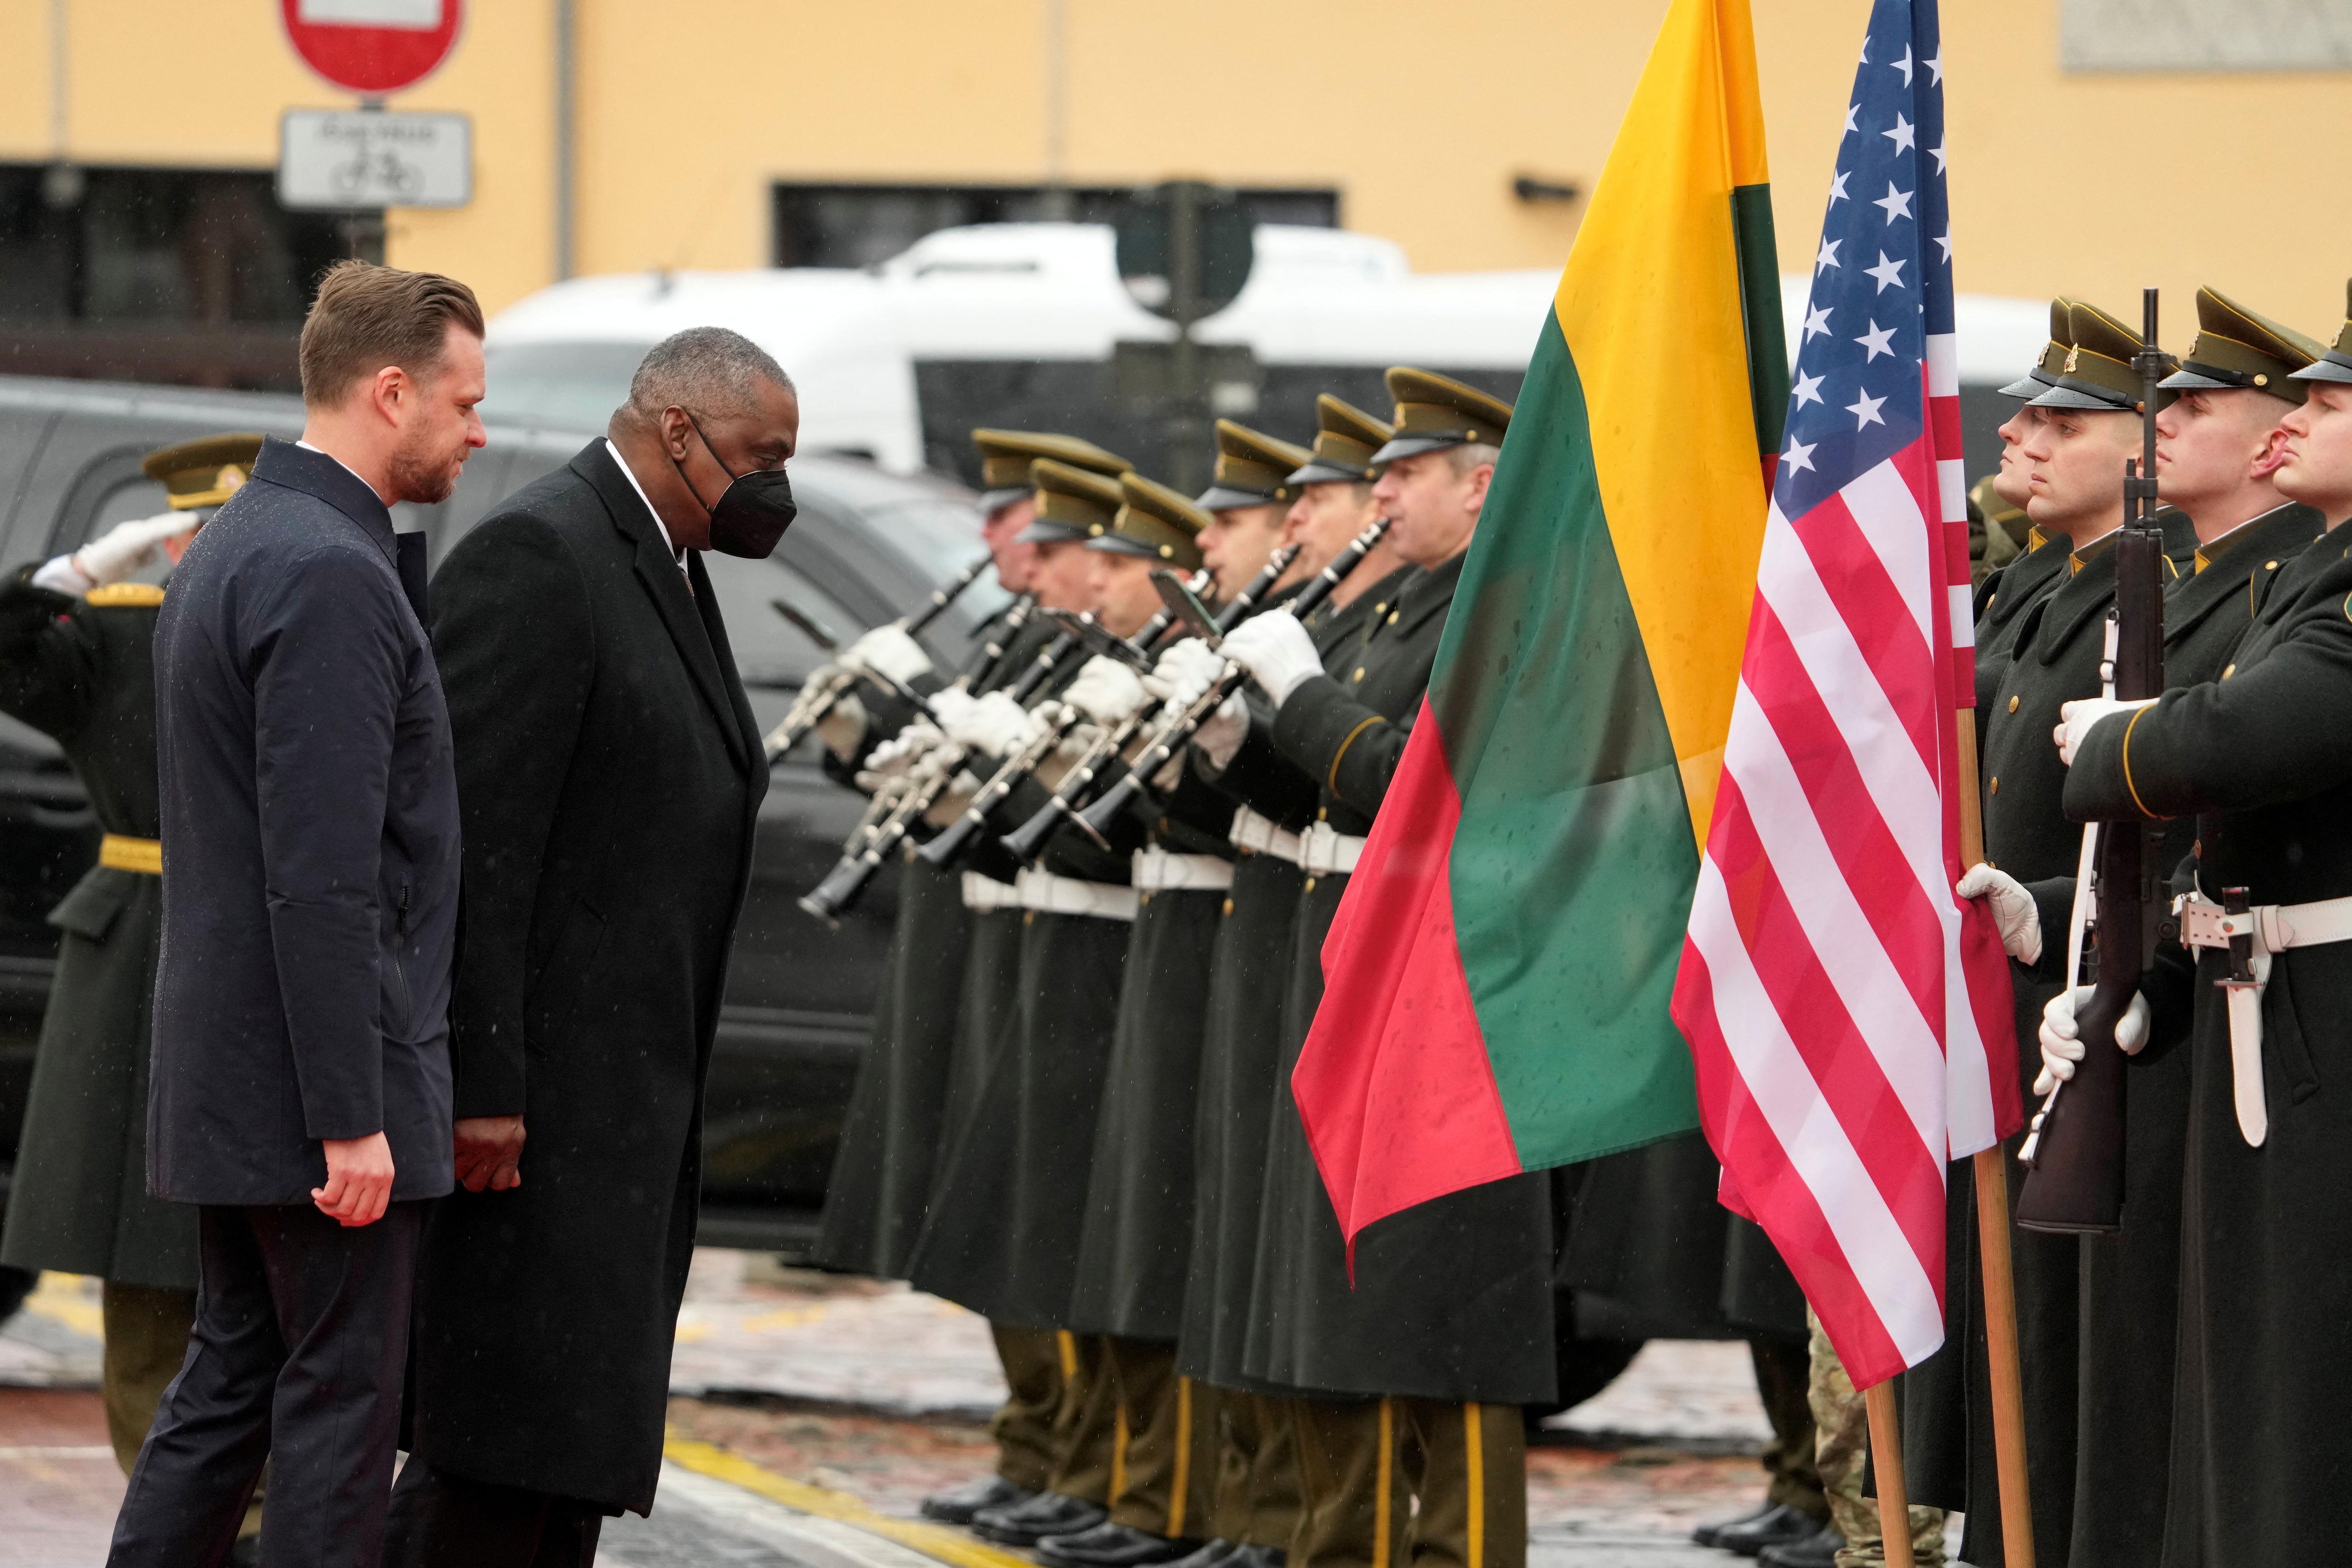 U.S. Defence Secretary Lloyd Austin attends a welcome ceremony in Vilnius